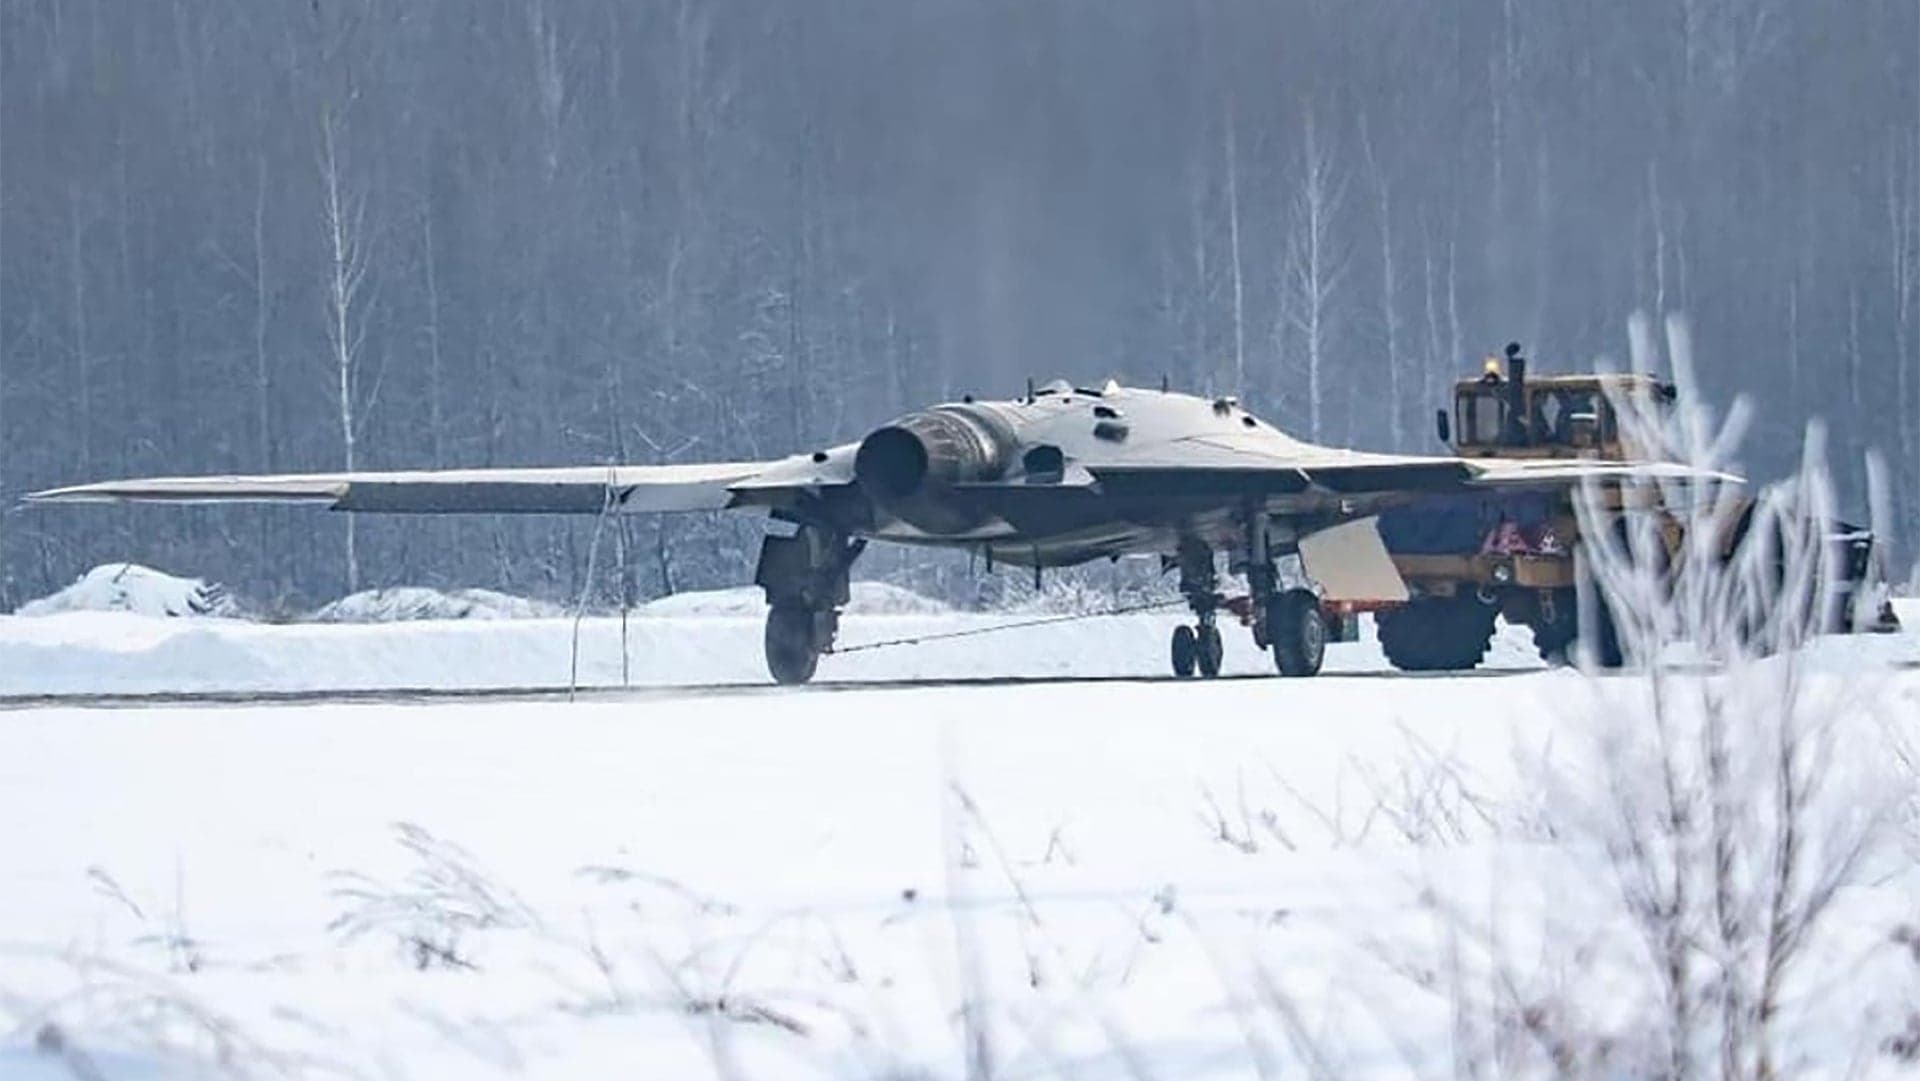 Detailed New Photos Of Russia’s ‘Hunter’ Unmanned Combat Air Vehicle Emerge: Our Analysis